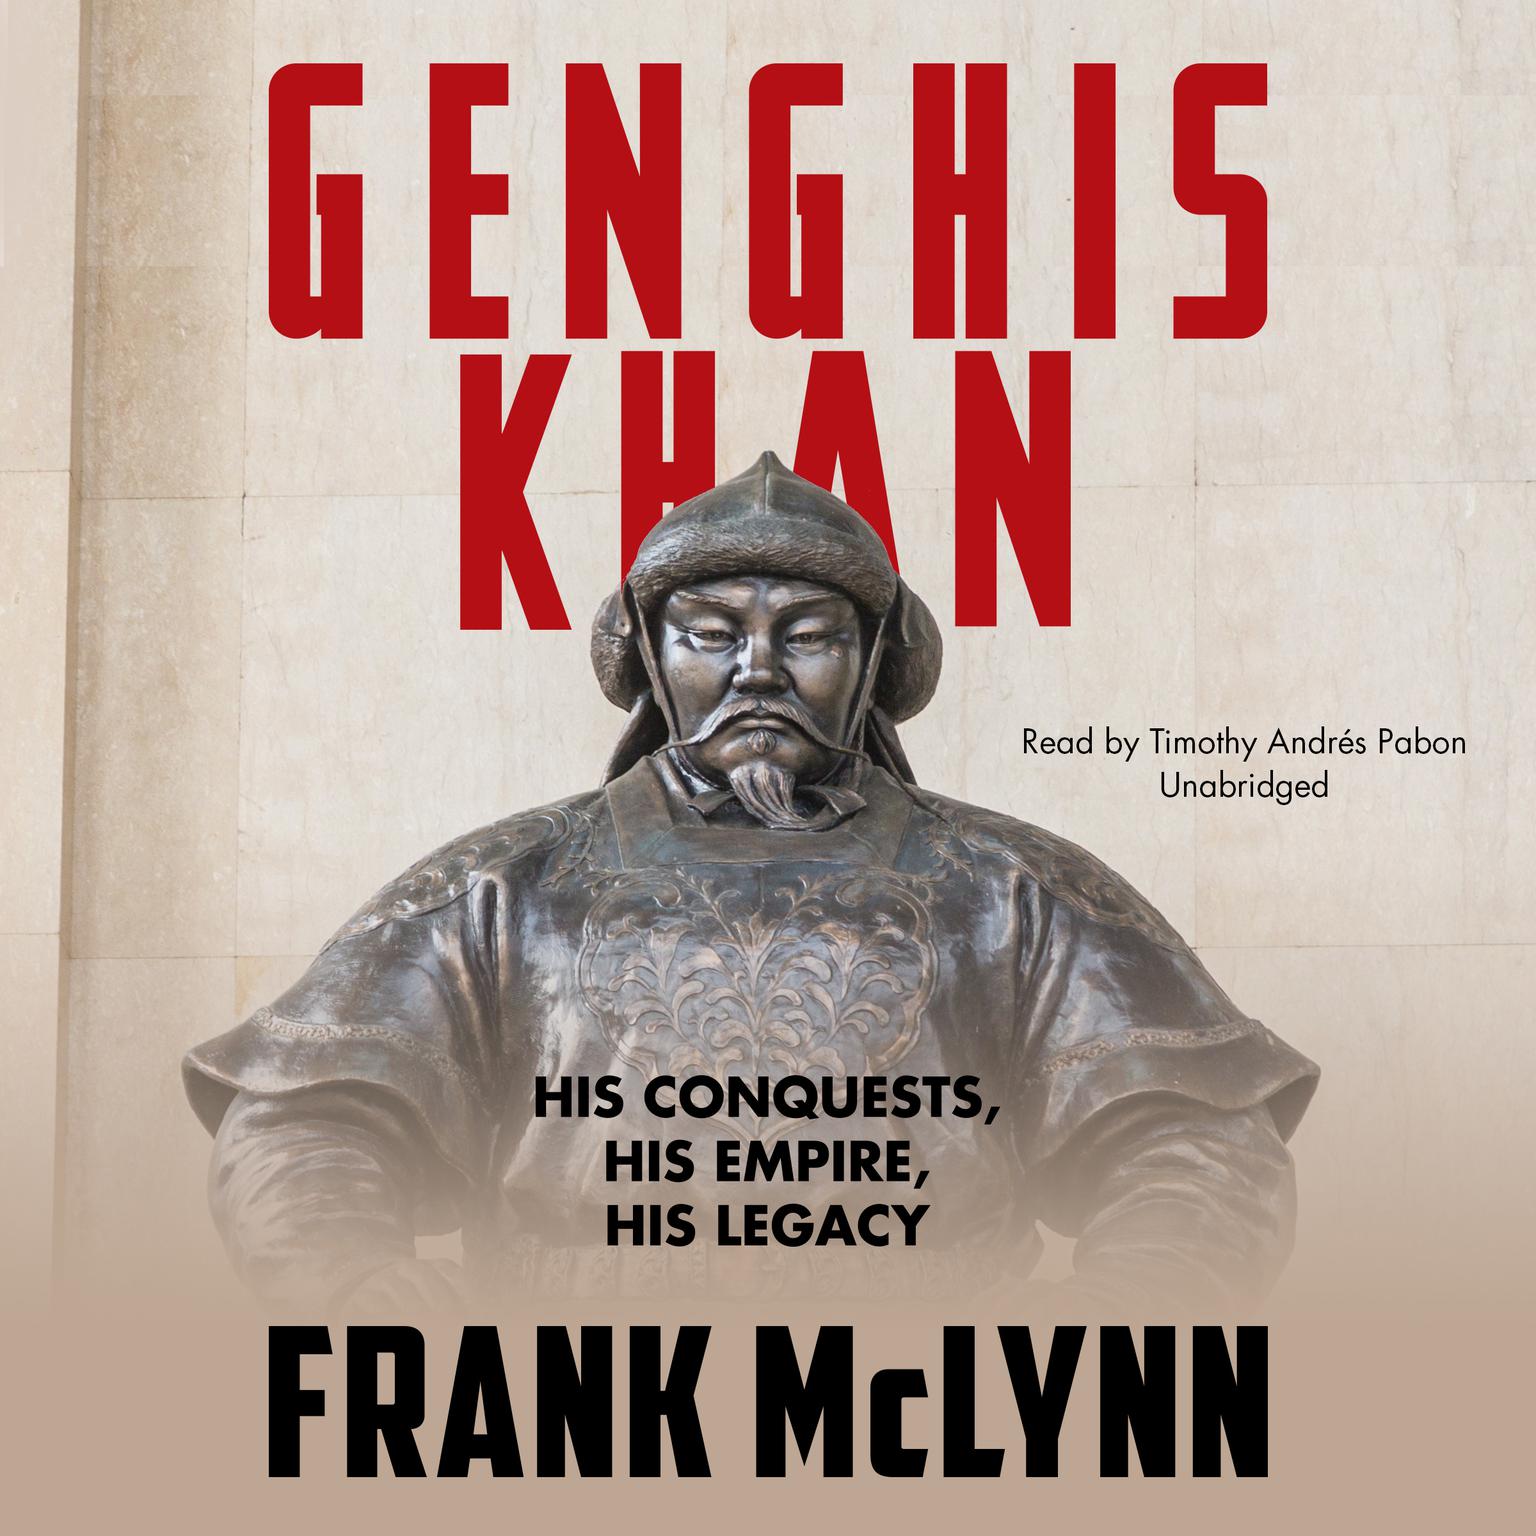 Genghis Khan: His Conquests, His Empire, His Legacy Audiobook, by Frank McLynn